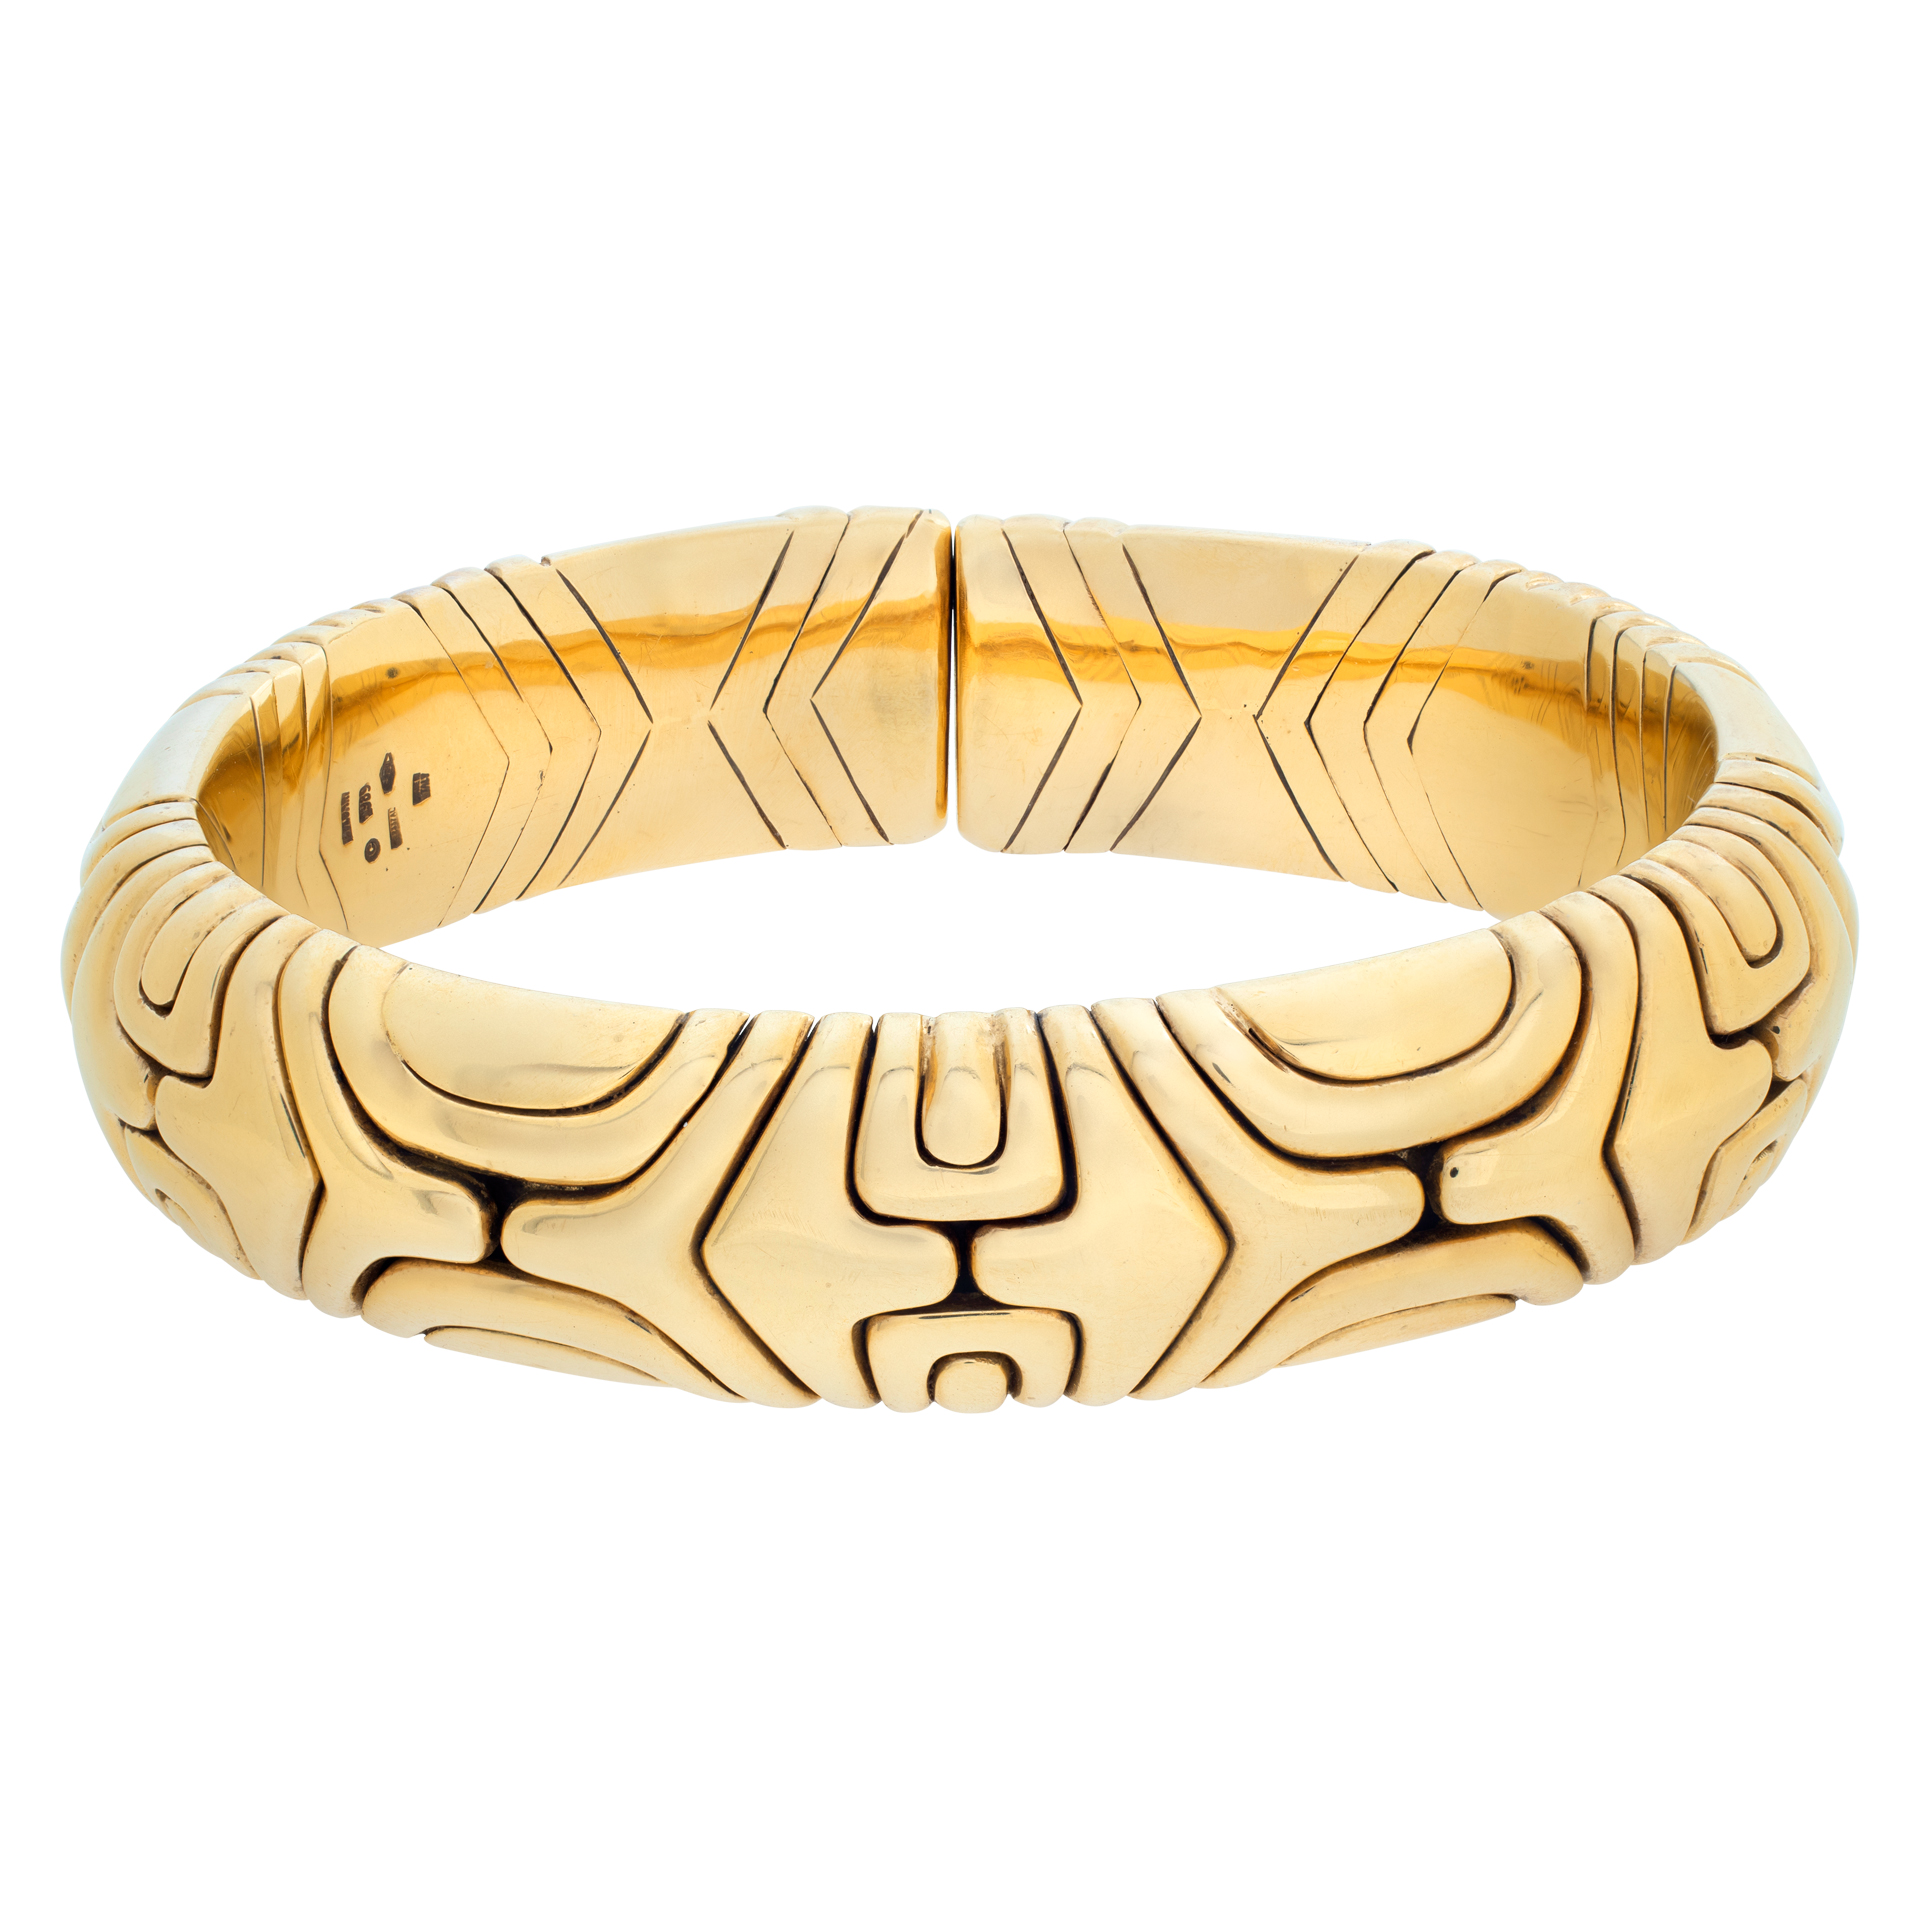 Vintage Bvlgari Alveare bracelet cuff bangle in 18Kt yellow gold. Made in italy 1989 image 1